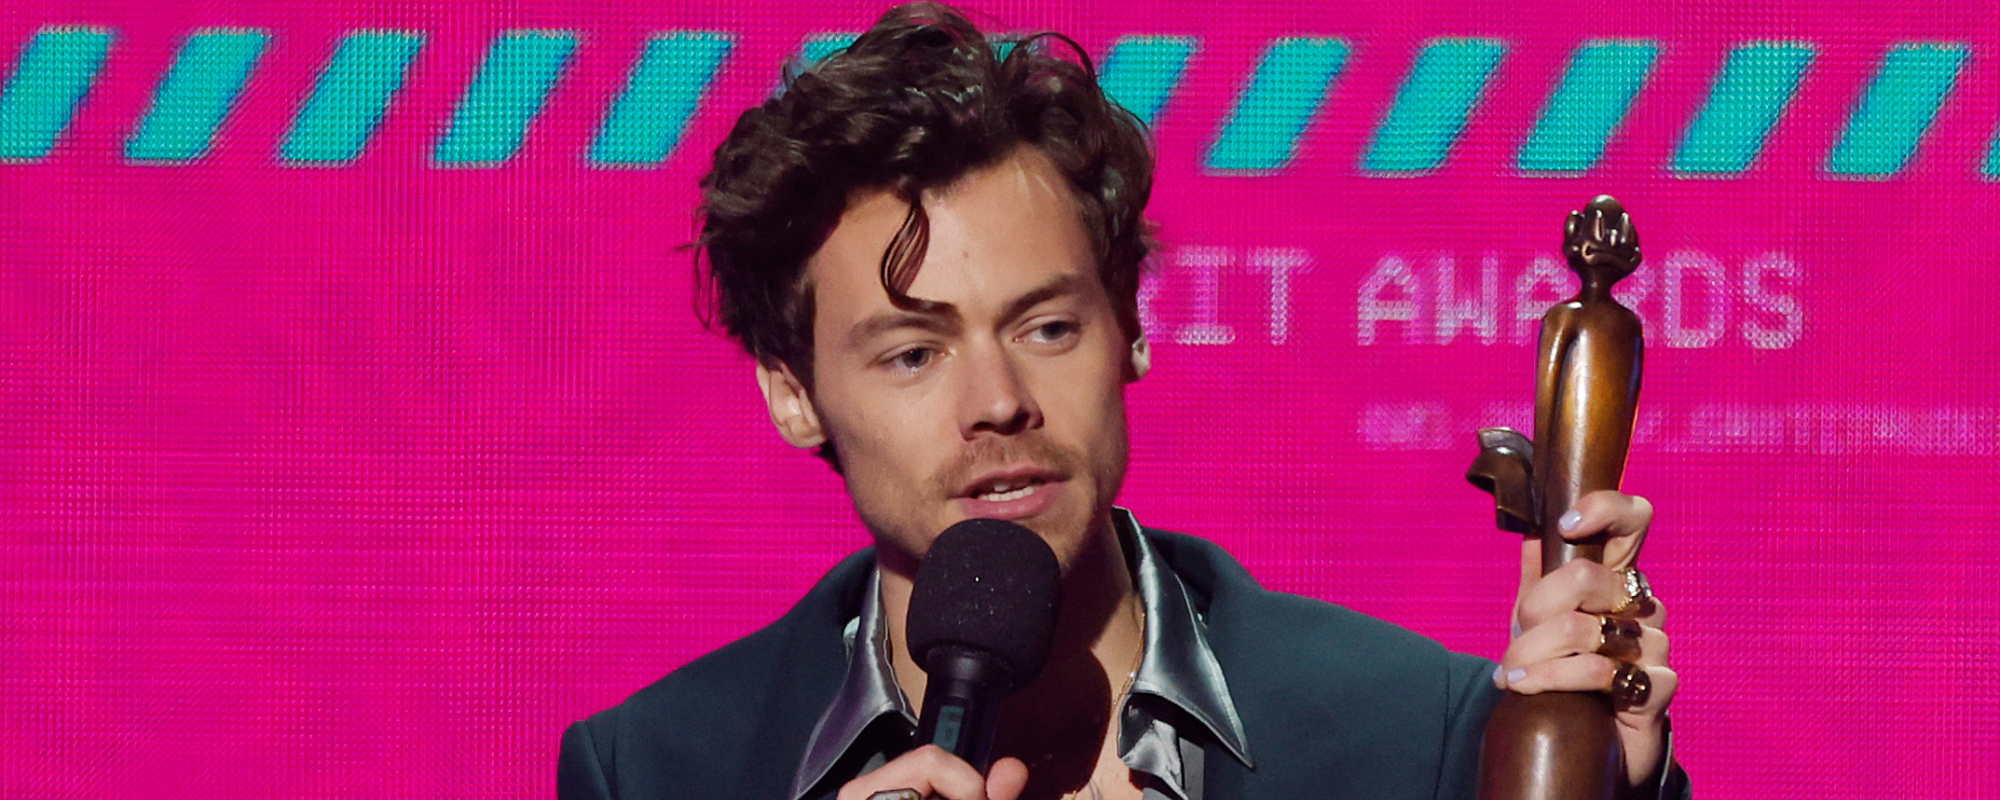 Harry Styles’ 5 Most Powerful Songs About Self-Discovery and Identity